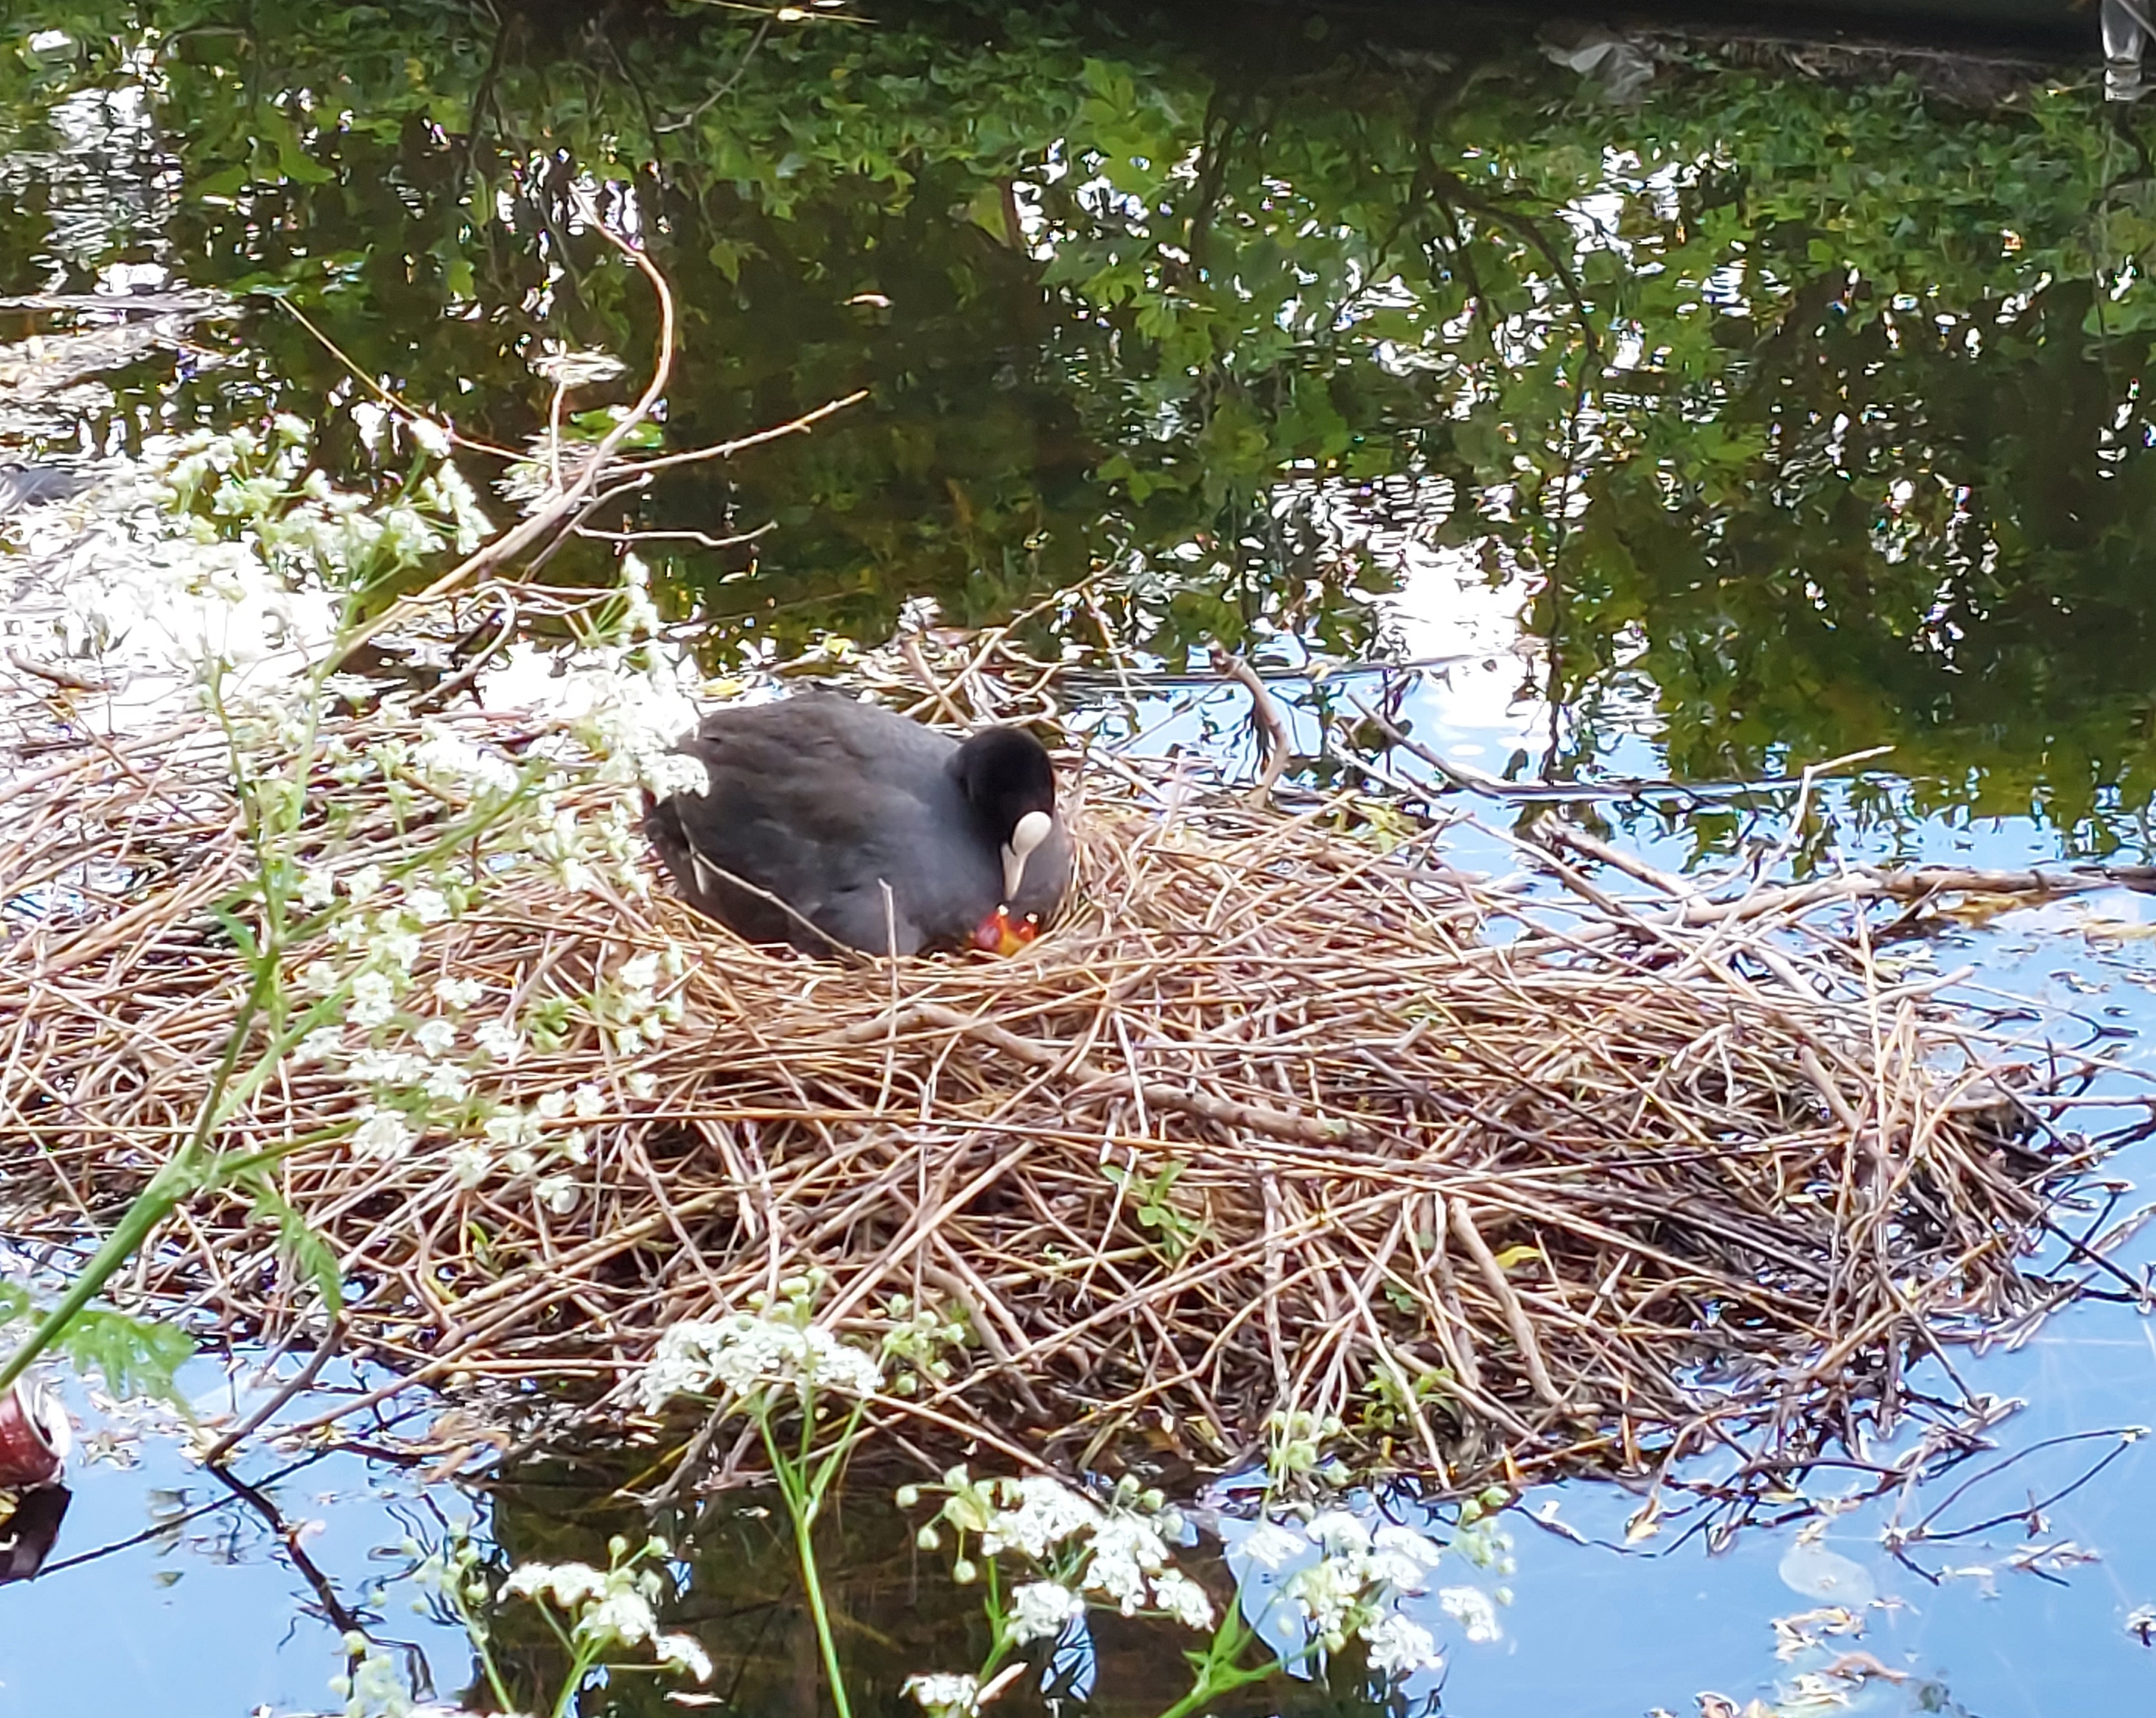 Some more local life: A European coot with young